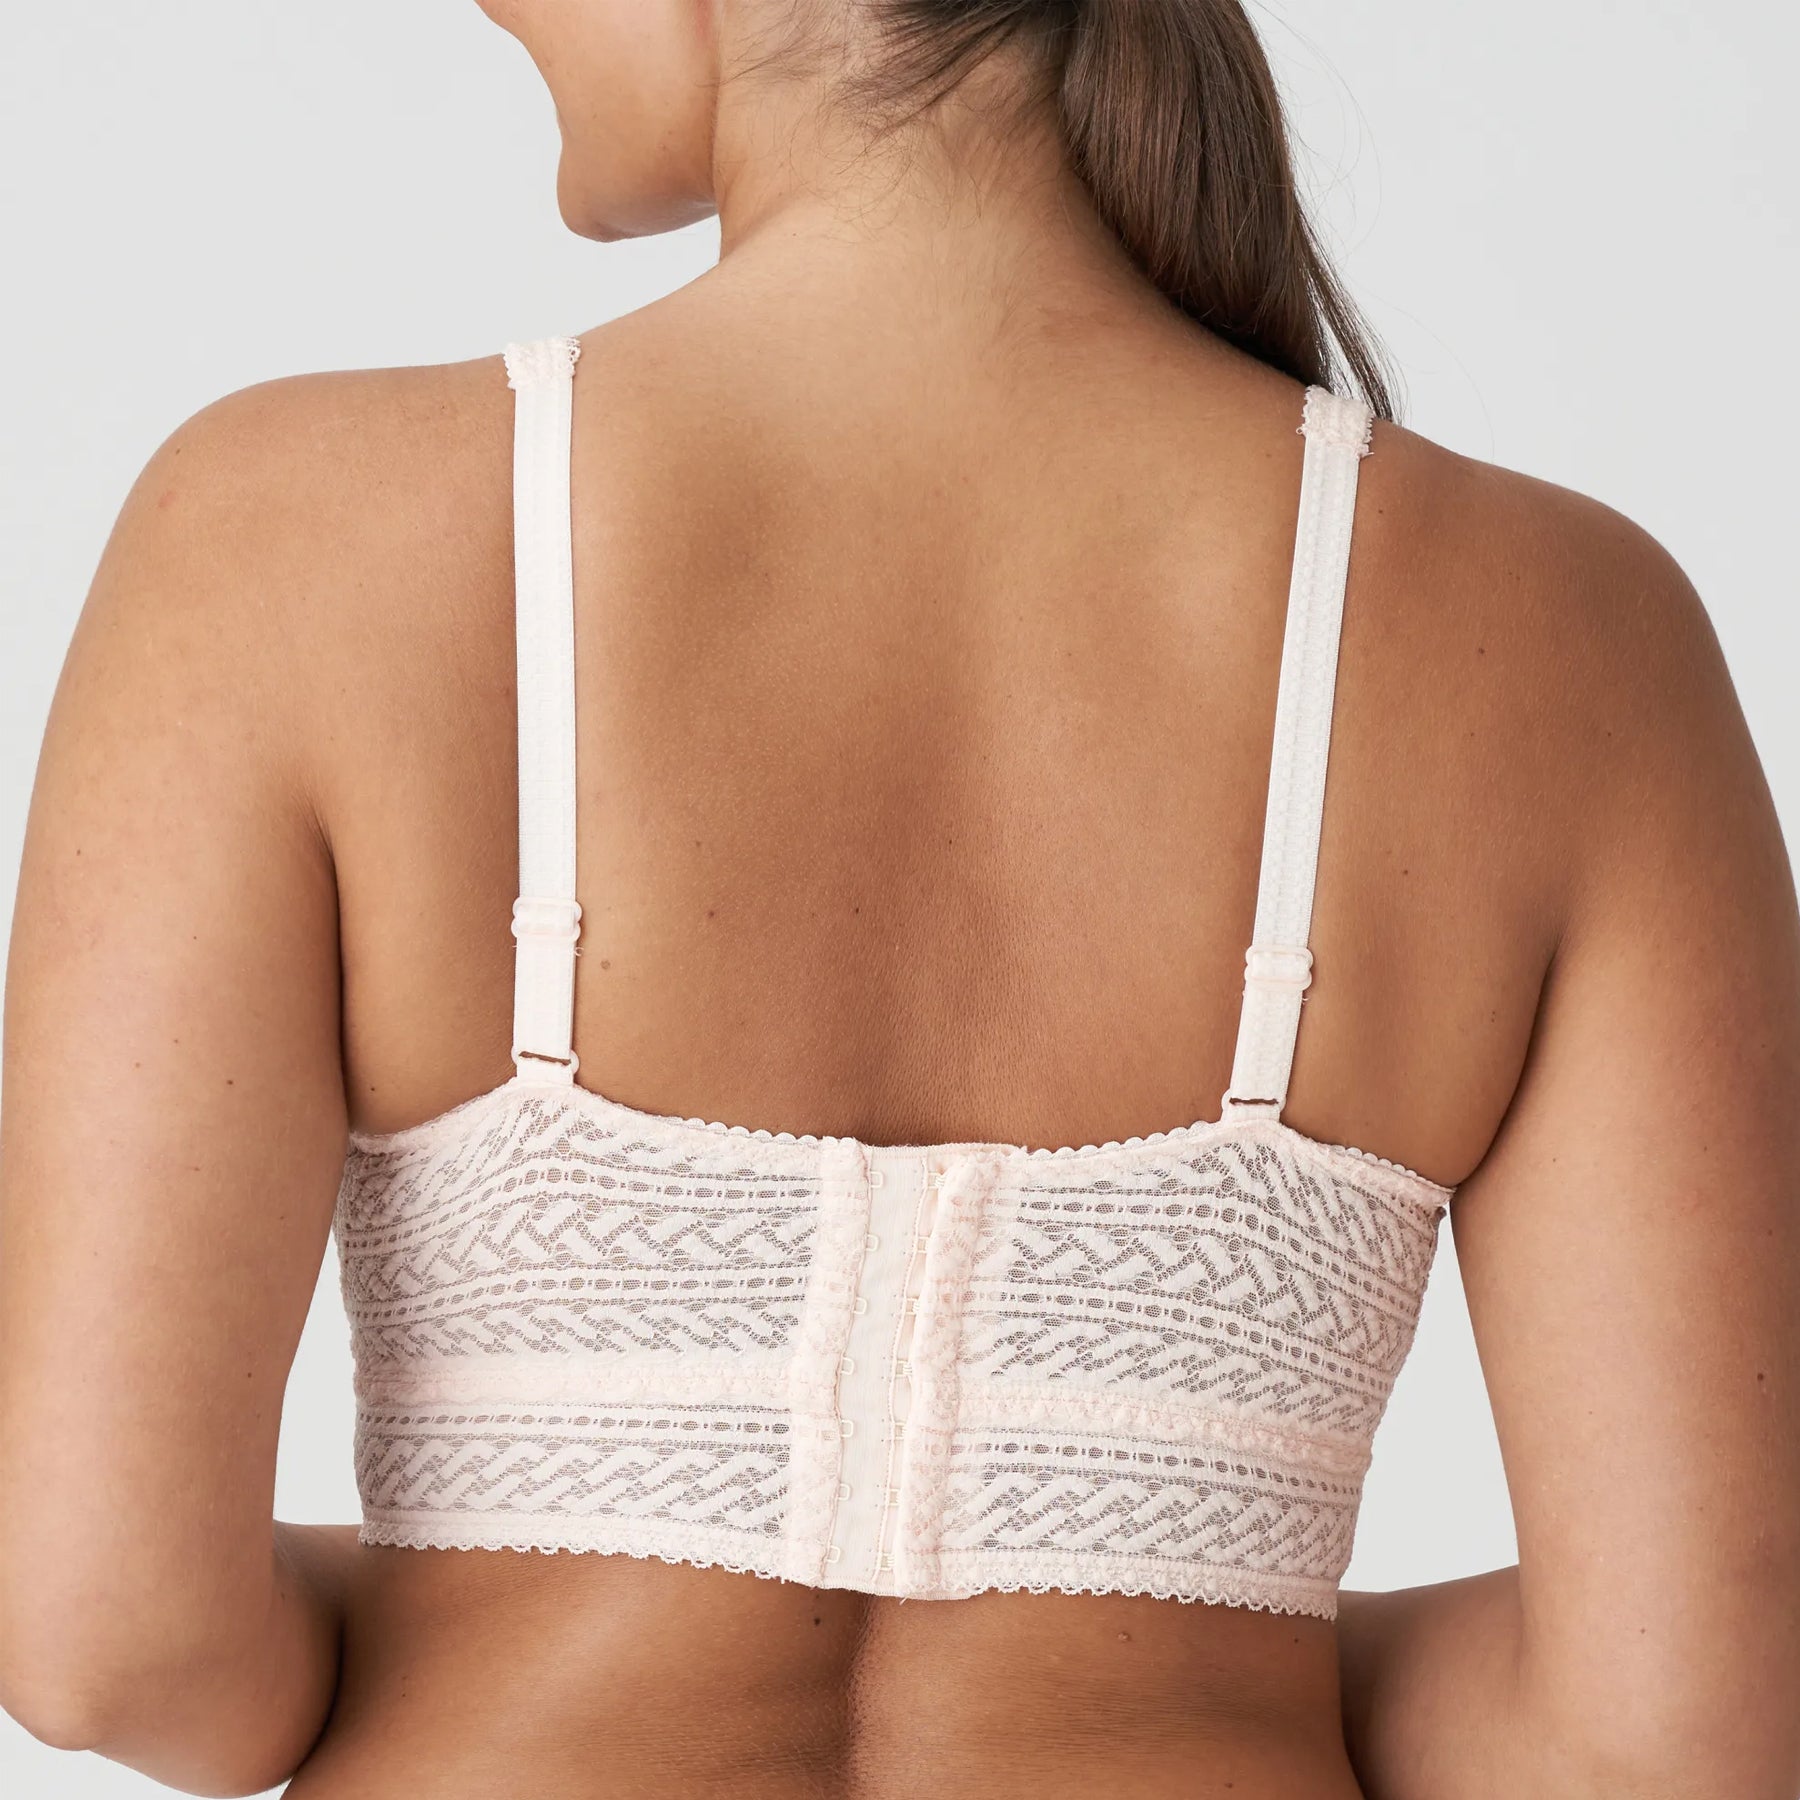 Columbia Women's Molded Cup Bra - High Support 1 Pack, White, Small